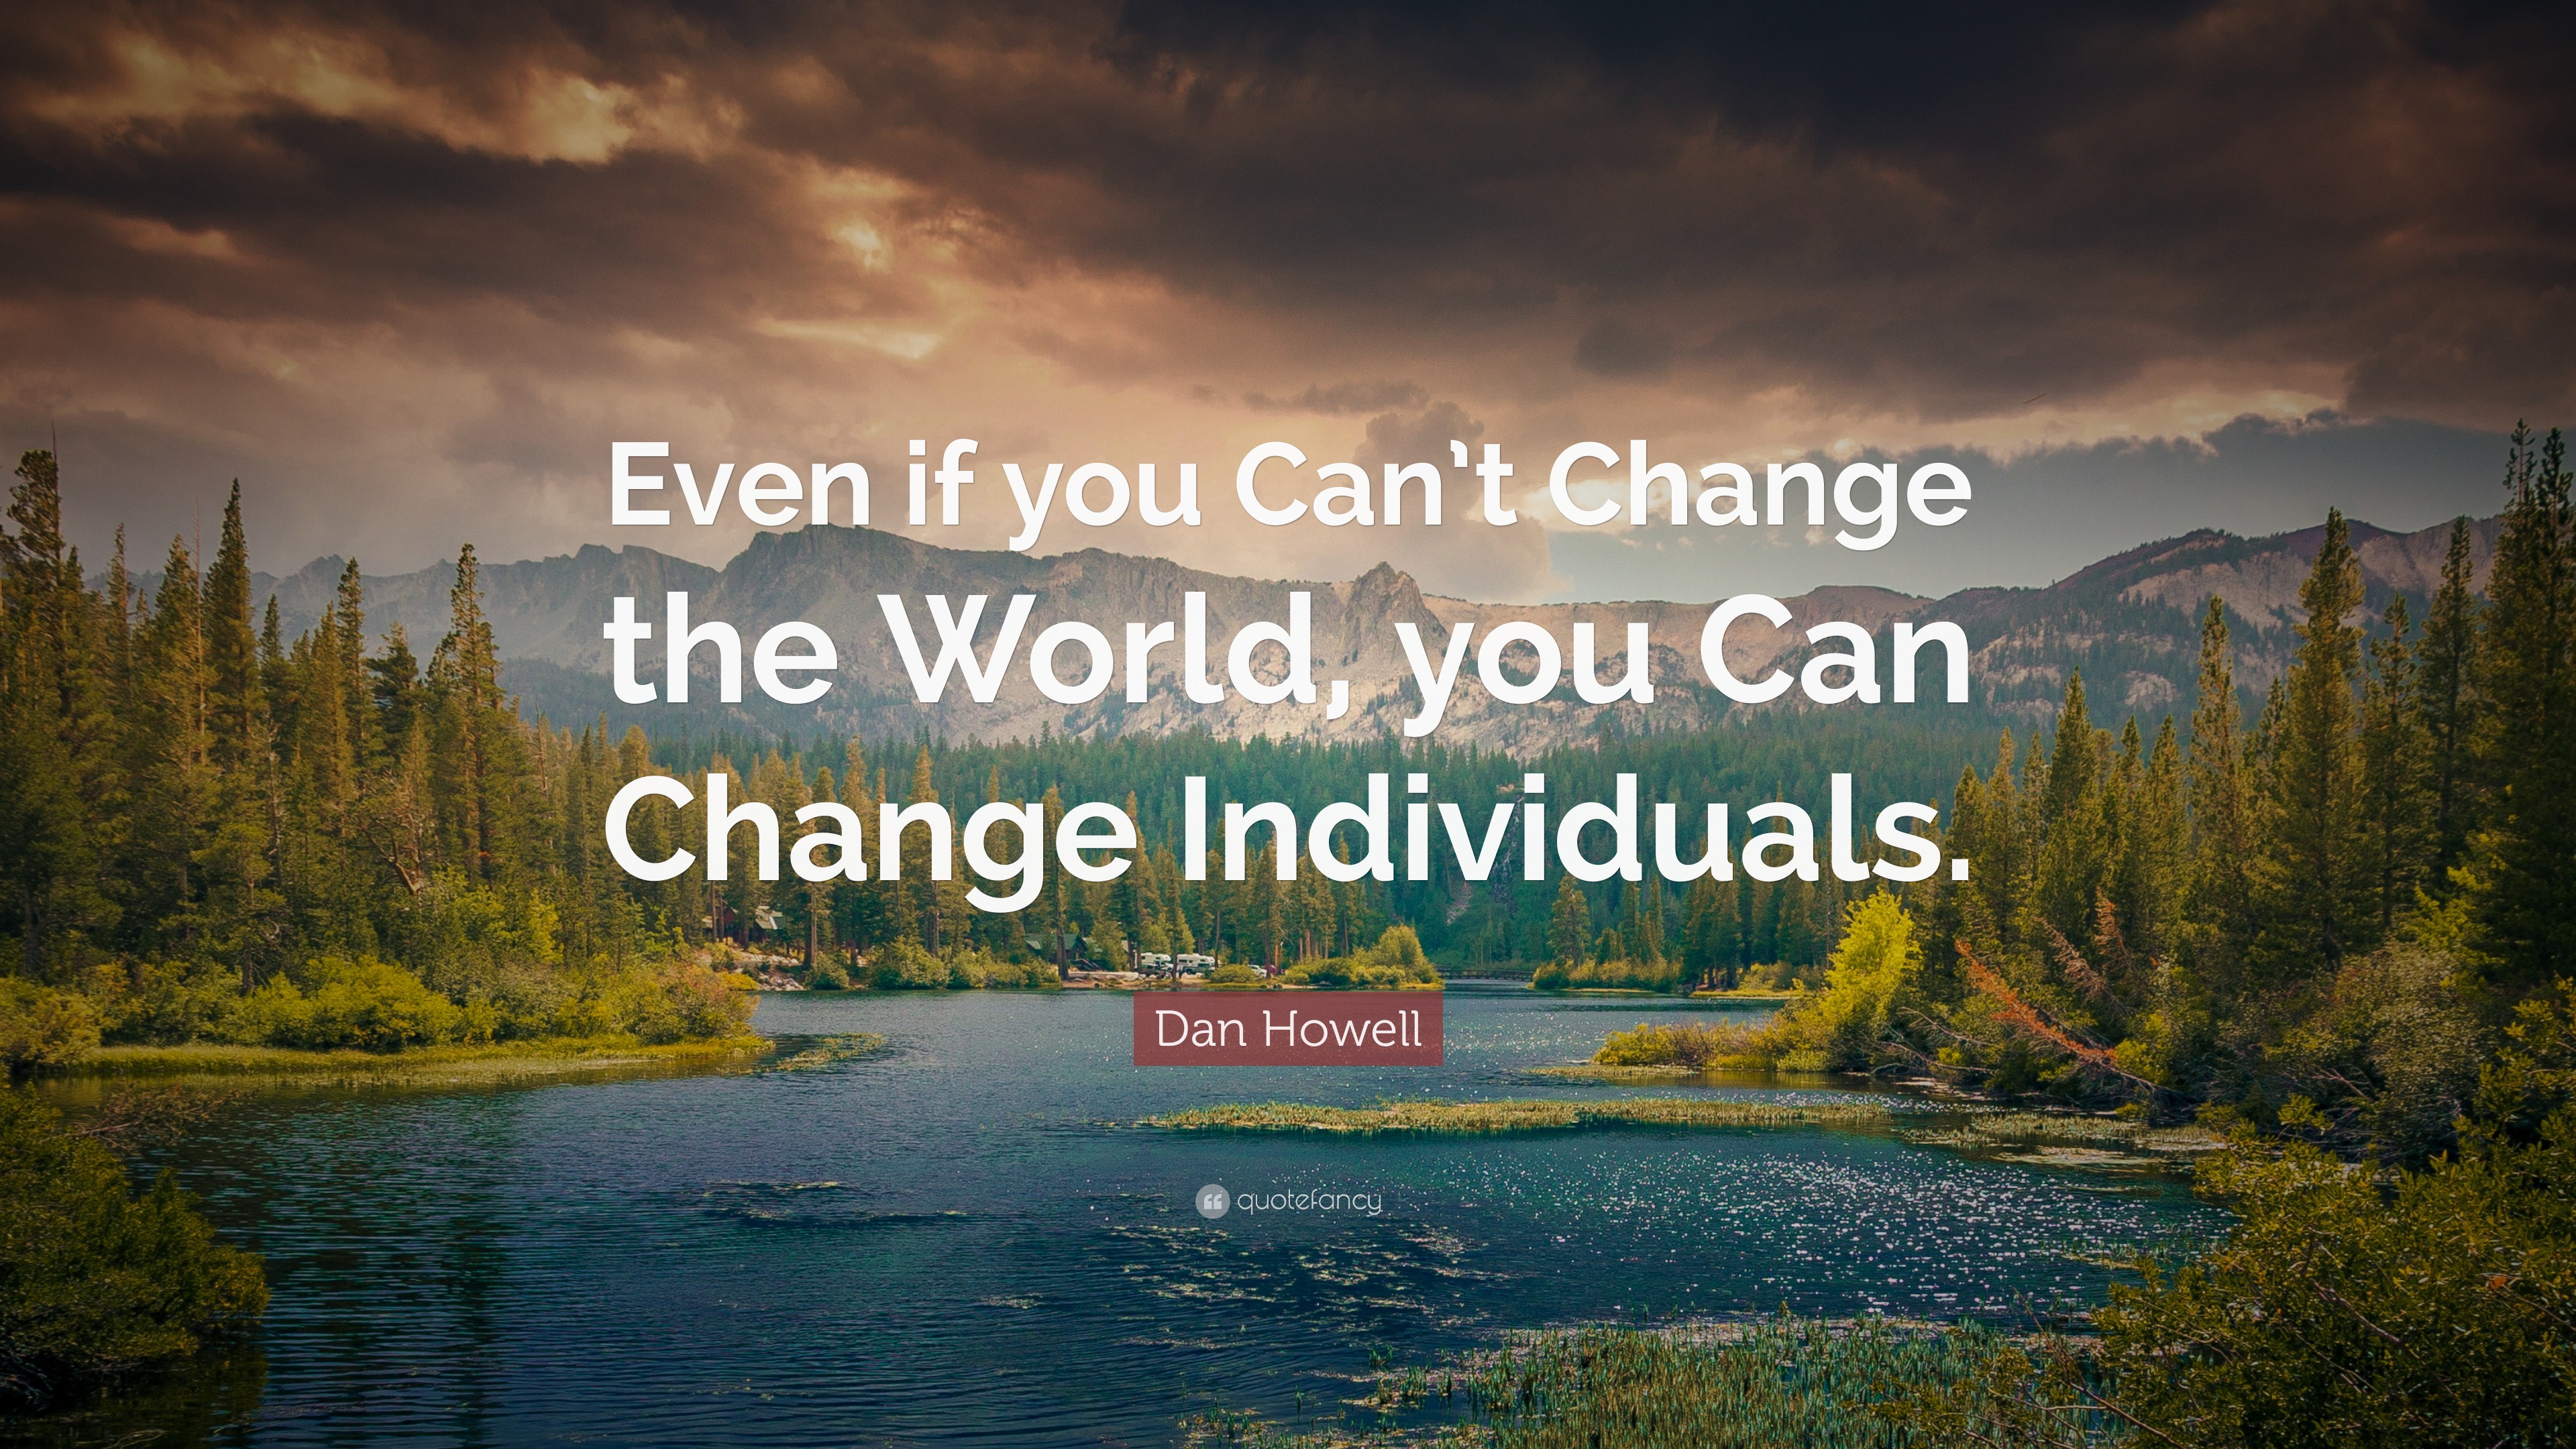 Dan Howell Quote: “Even if you Can’t Change the World, you Can Change